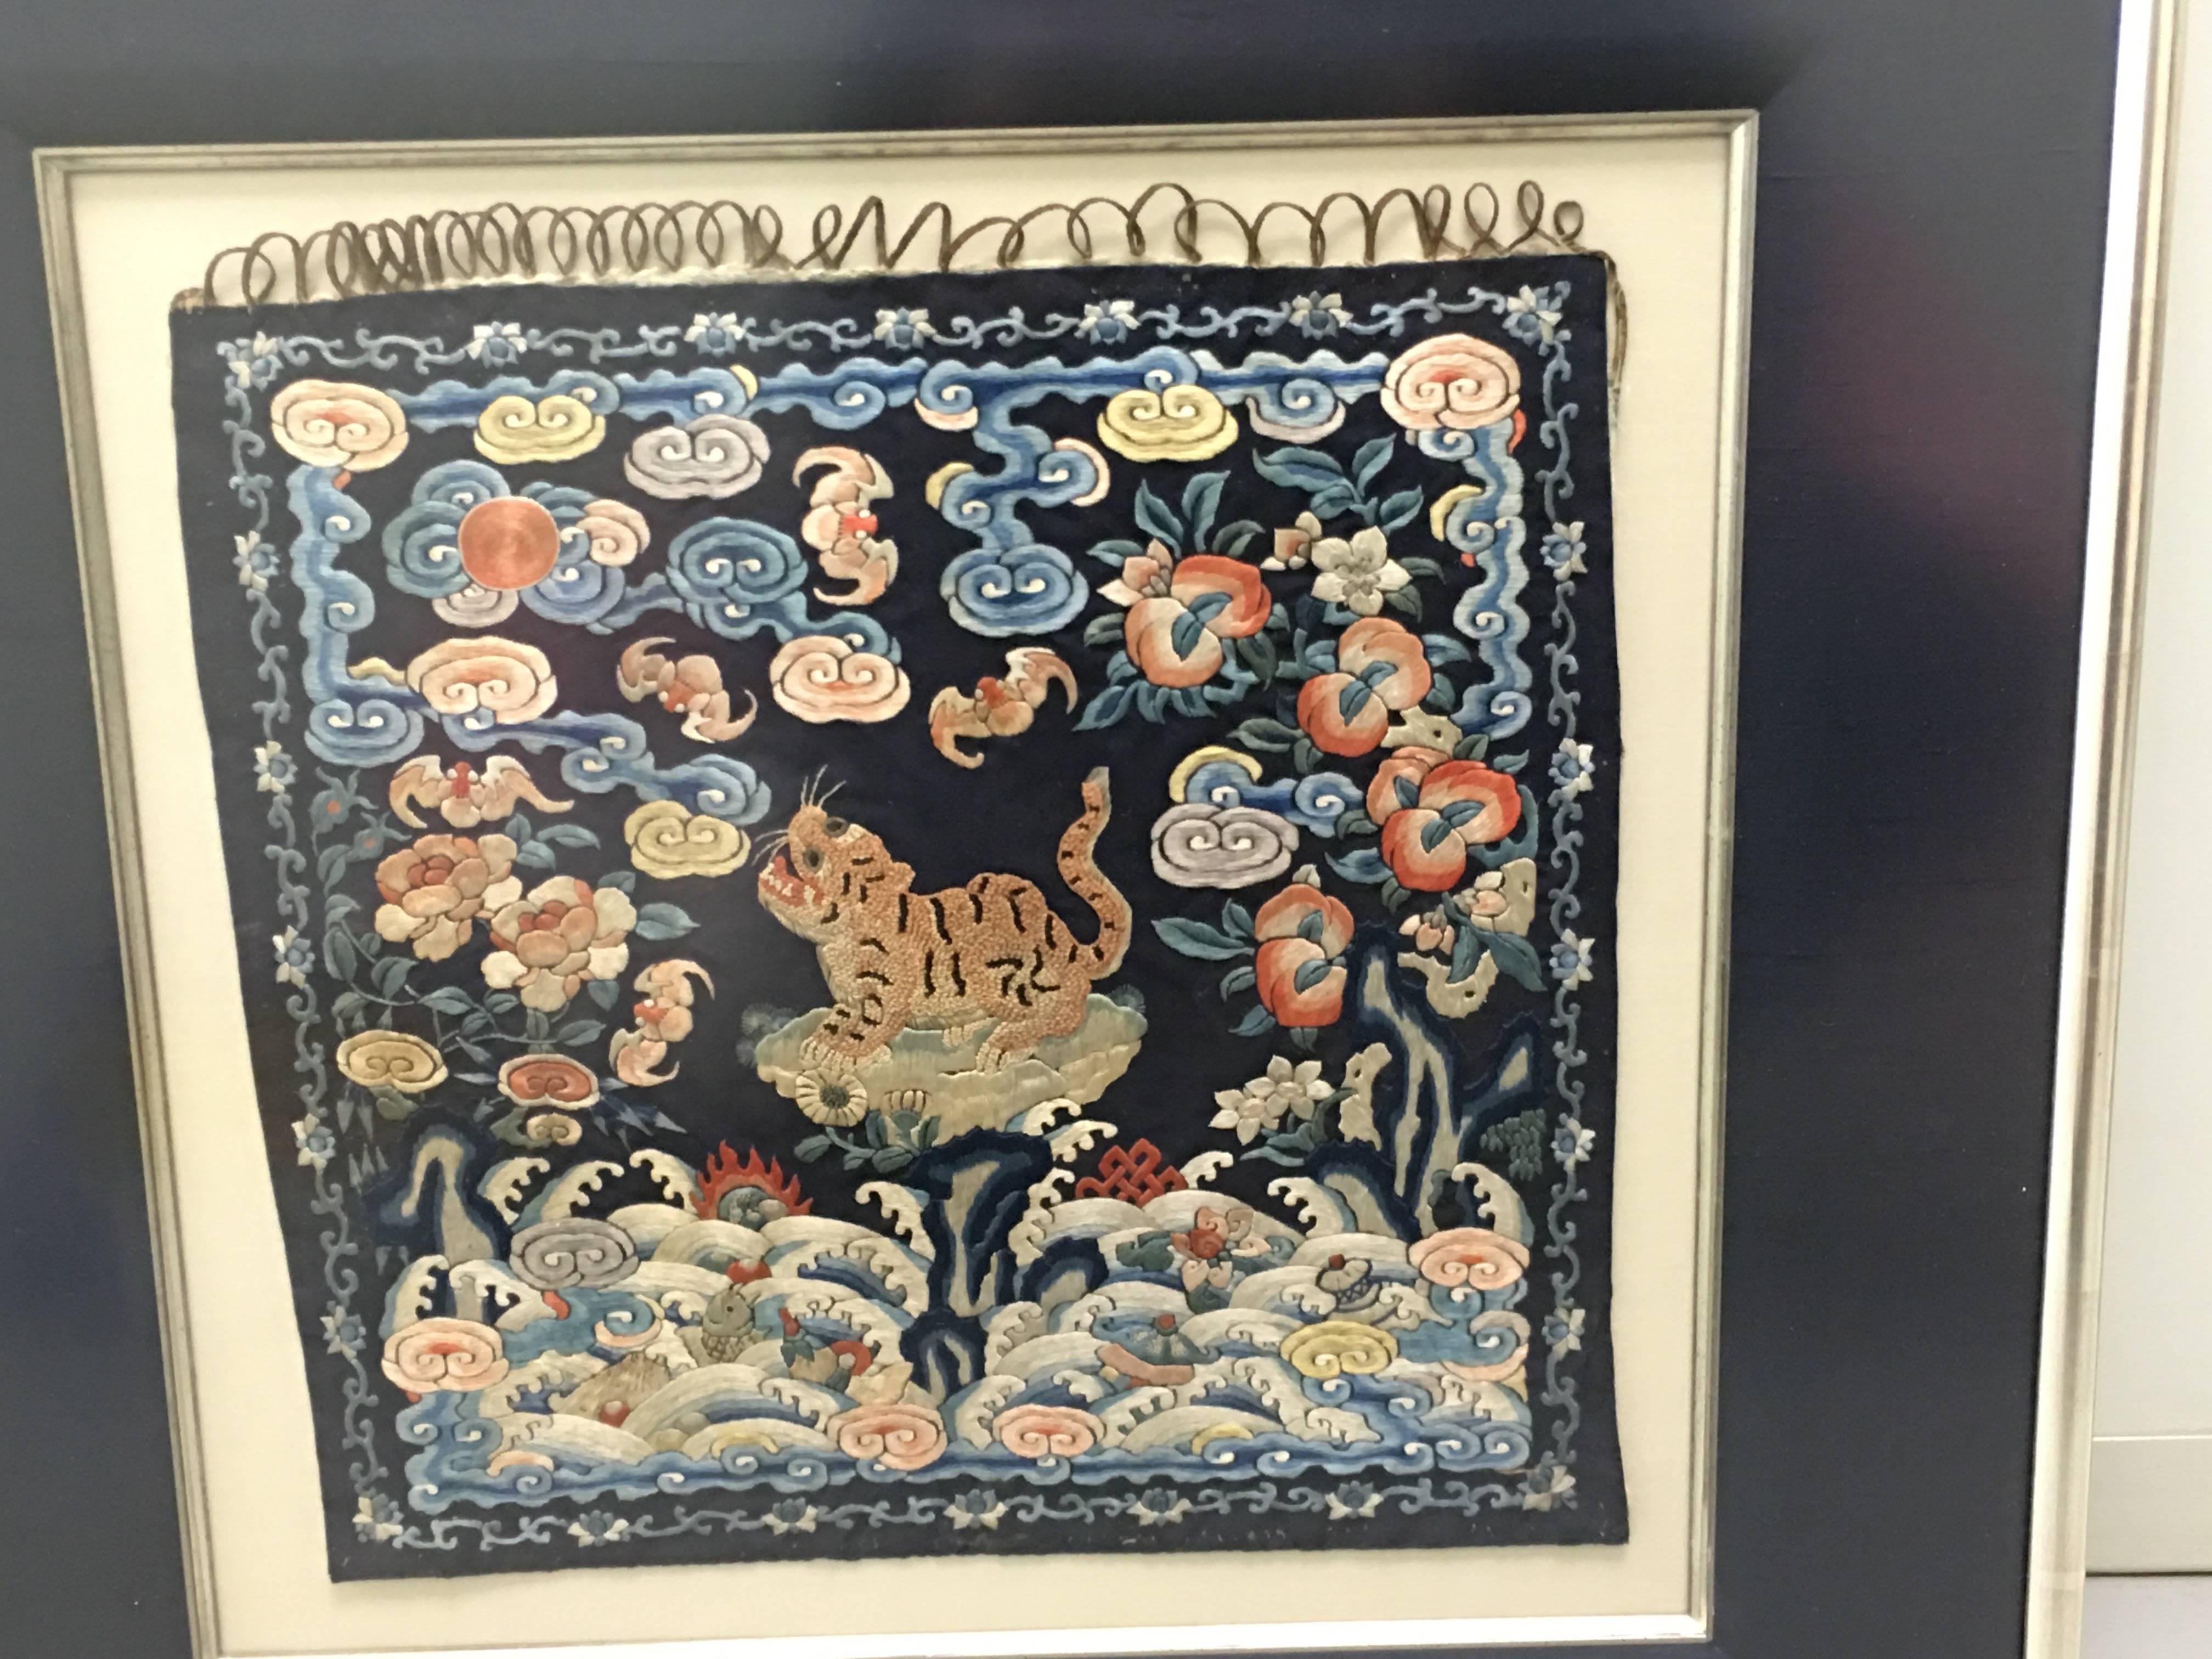 Pair of 19th century framed Chinese military rank badges. Each badge features a central tiger motif, indicating 4th rank. Midnight blue silk backing with multi-color embroidered detailing and gold couched stitching. Mounted on ivory silk with